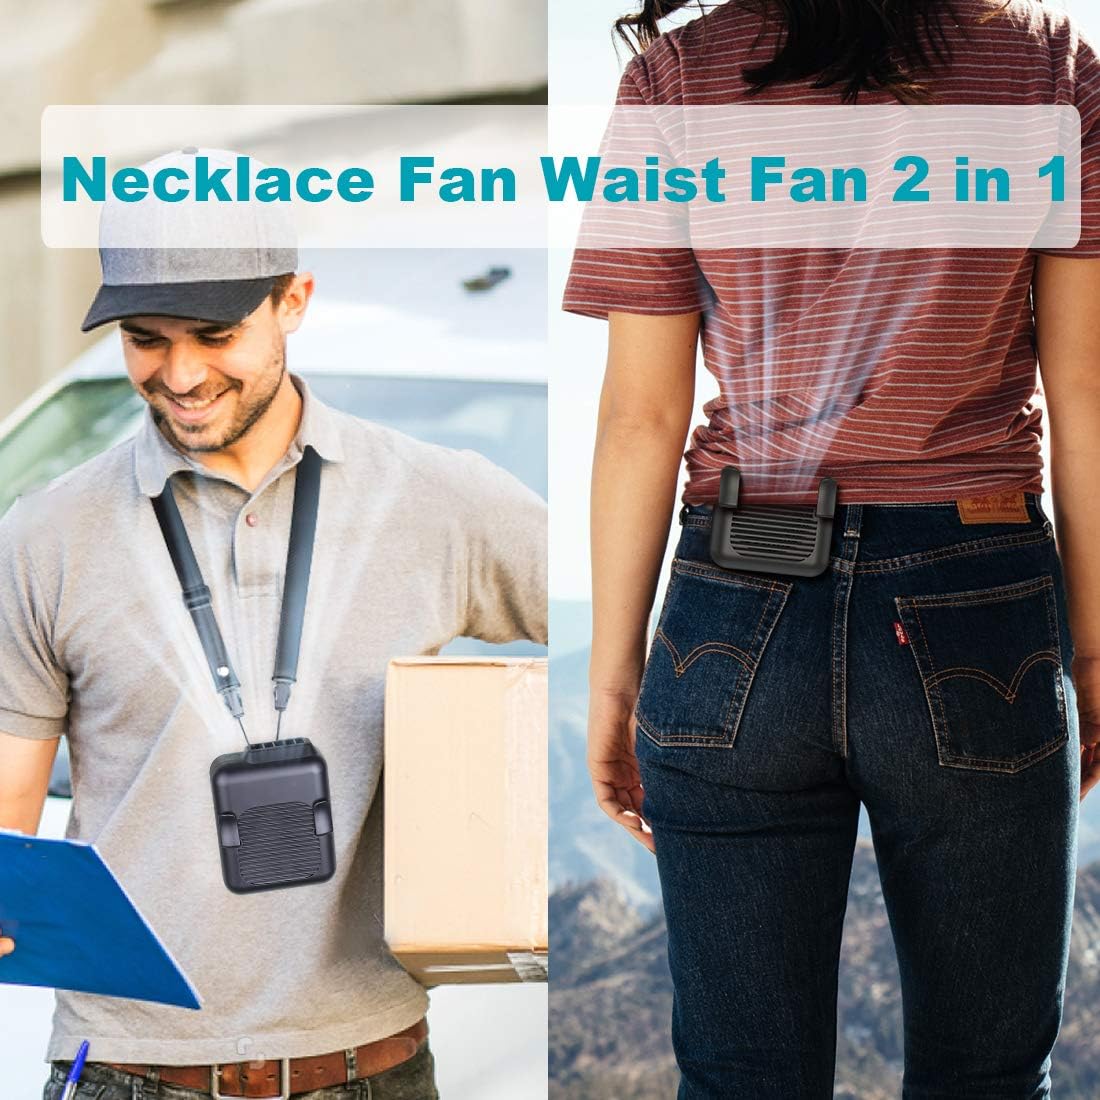 SLENPET Portable Waist Clip Fan, 6000mAh Battery Operated Necklace Fan, 23 Hours Working Time, 3 Speeds, 5100RPM Strong Airflow Hands-free Belt Fan for Outdoor Works, Farm, Hiking, Camping, Travel